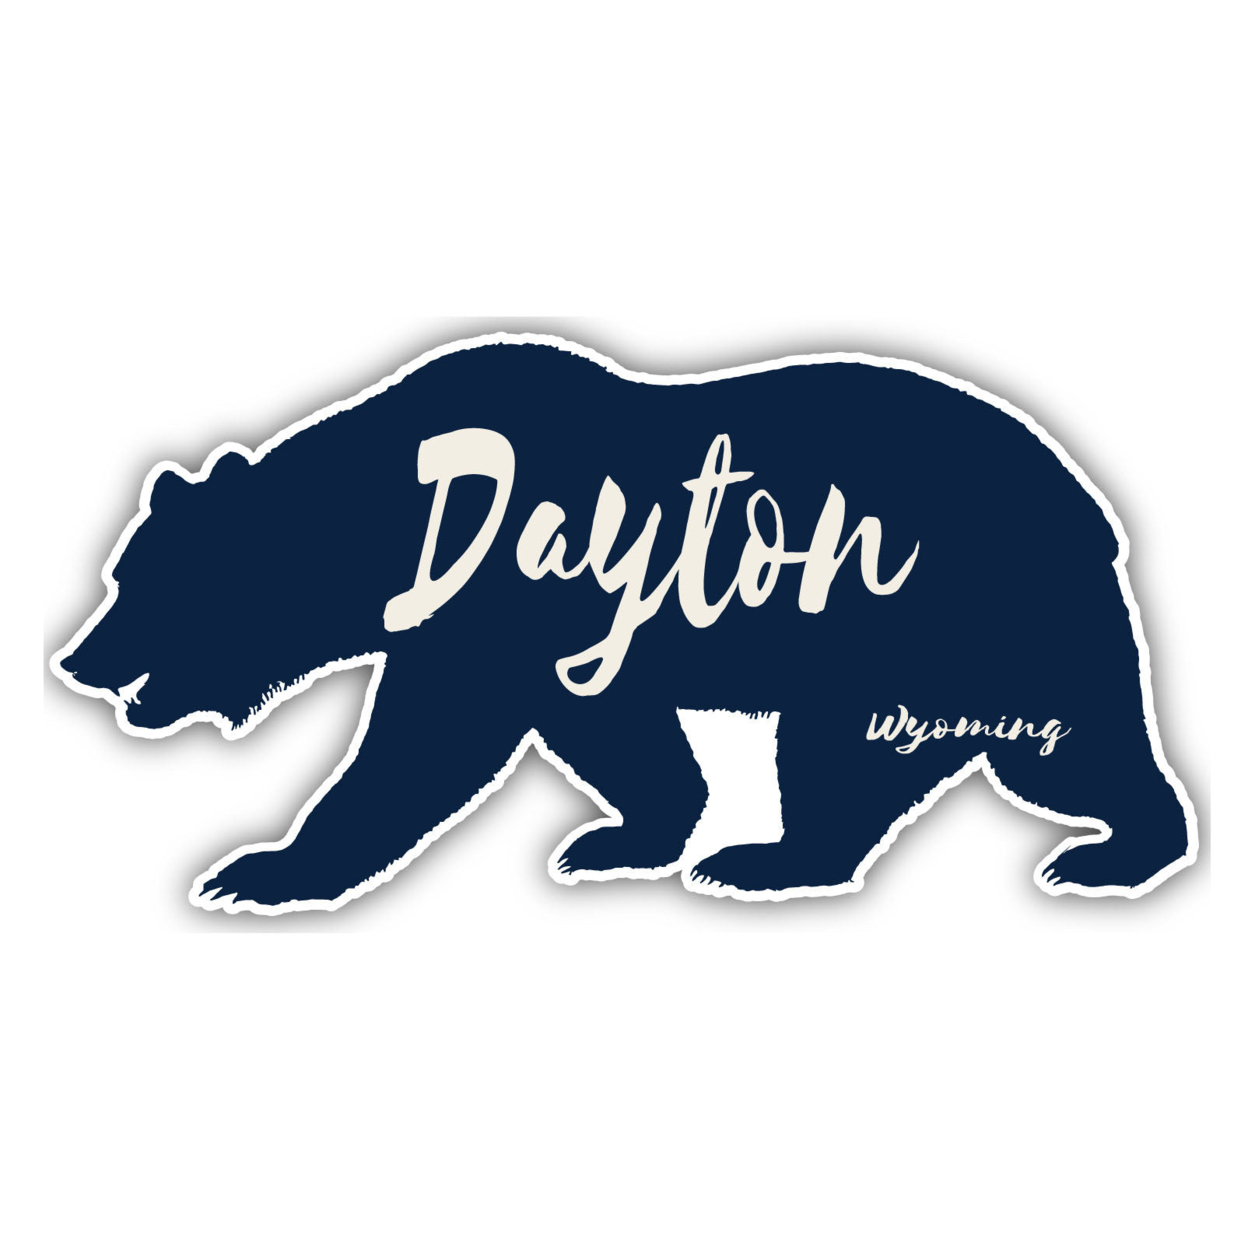 Dayton Wyoming Souvenir Decorative Stickers (Choose Theme And Size) - 4-Pack, 8-Inch, Bear